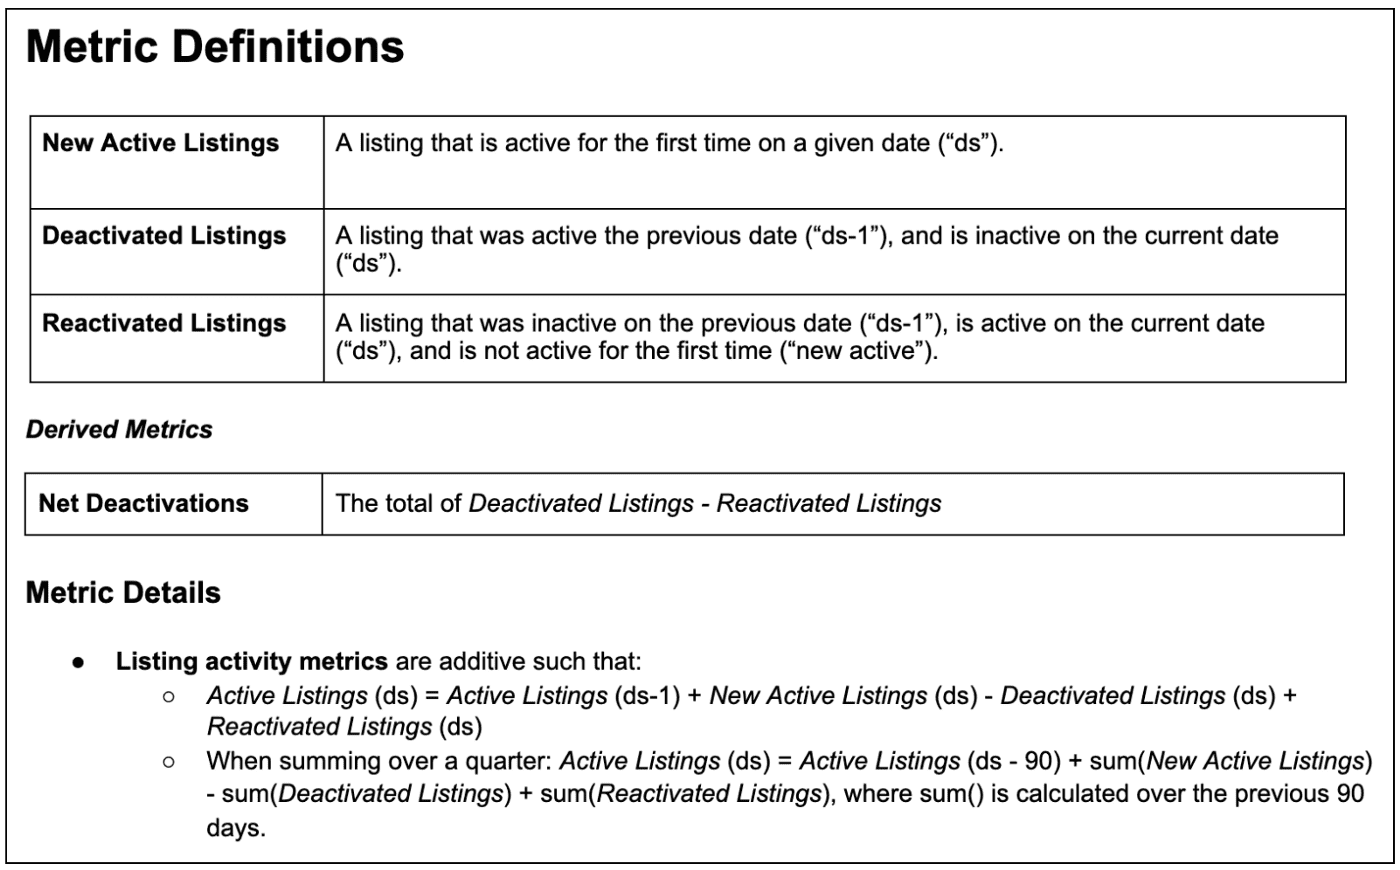 Fig 6: An example Metric Definitions section from a Midas design spec.